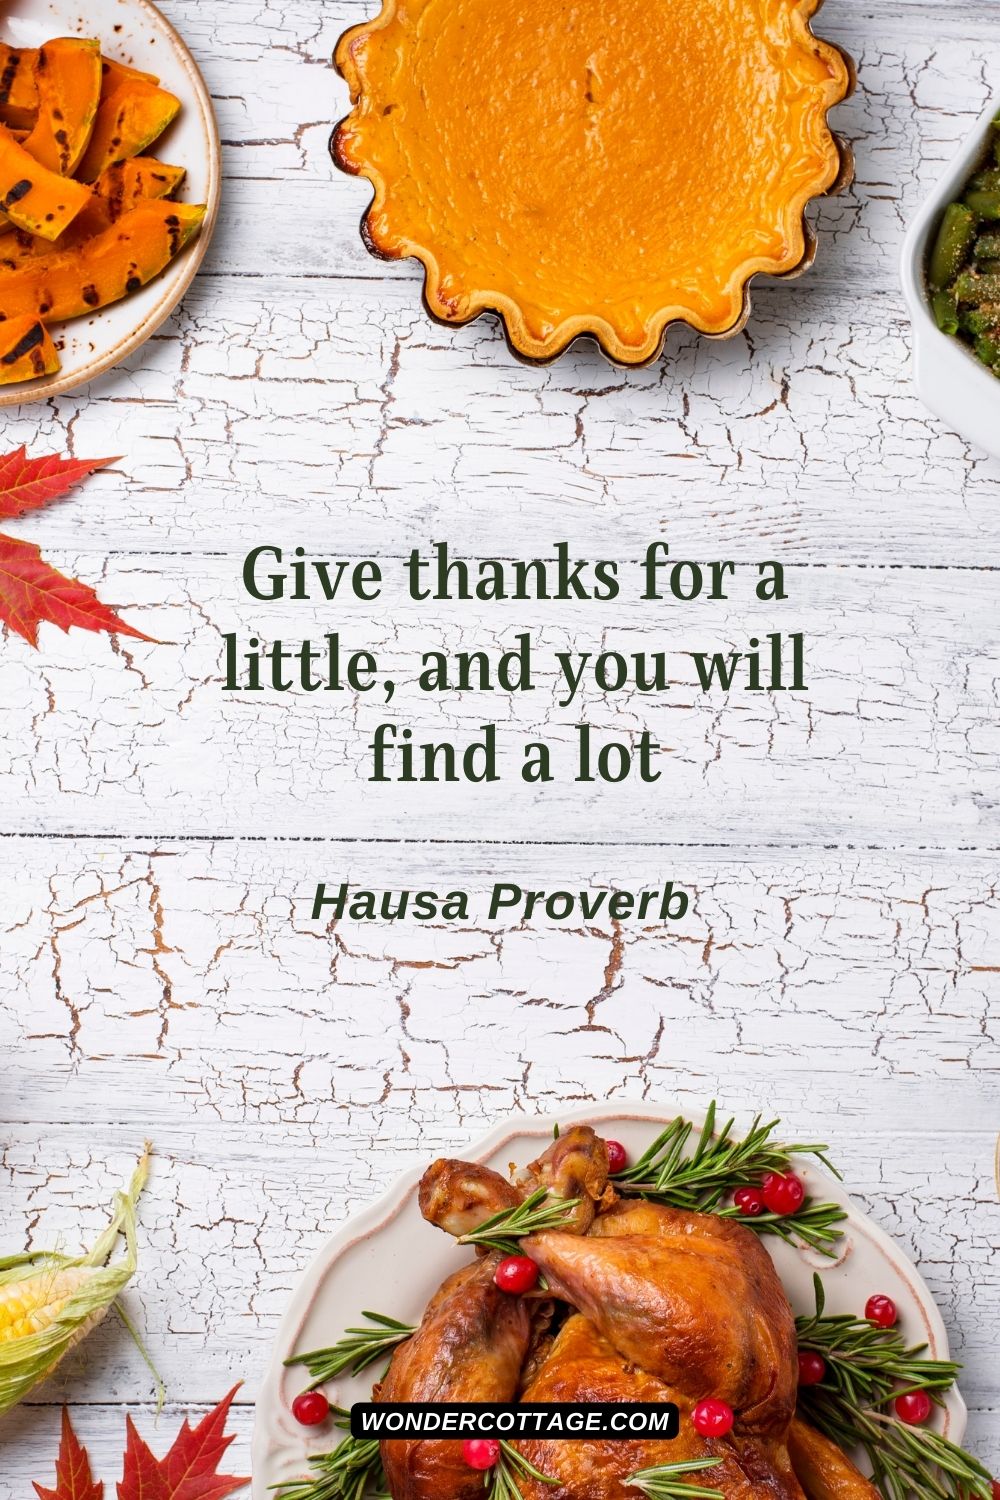 Give thanks for a little, and you will find a lot Hausa Proverb